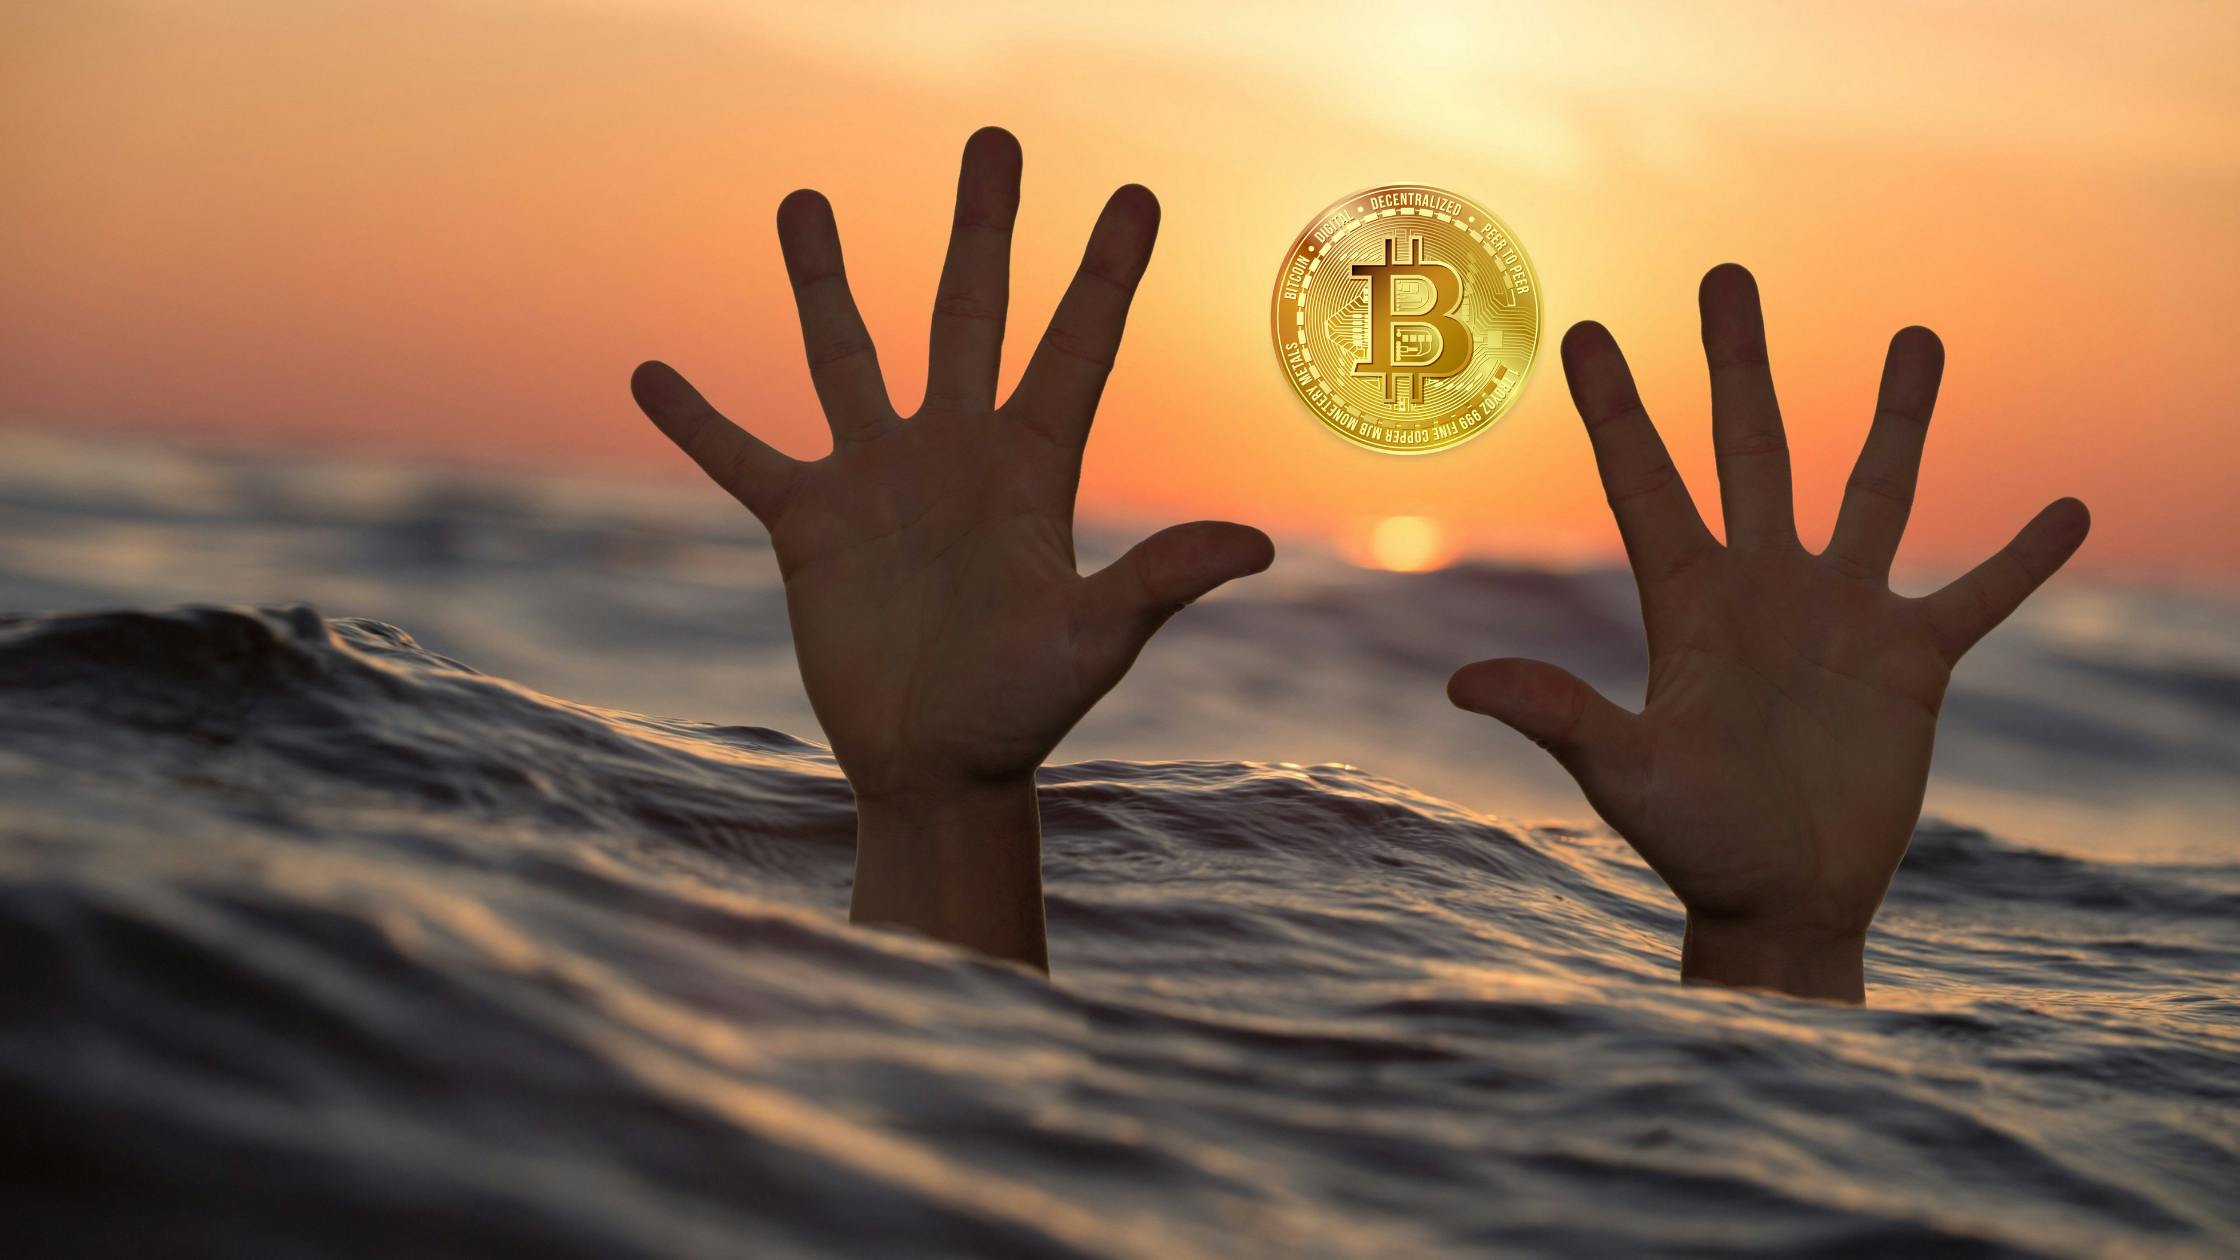 Will Bitcoin Fall to $13,800? — What an 80% Drawdown Will Look Like From Here